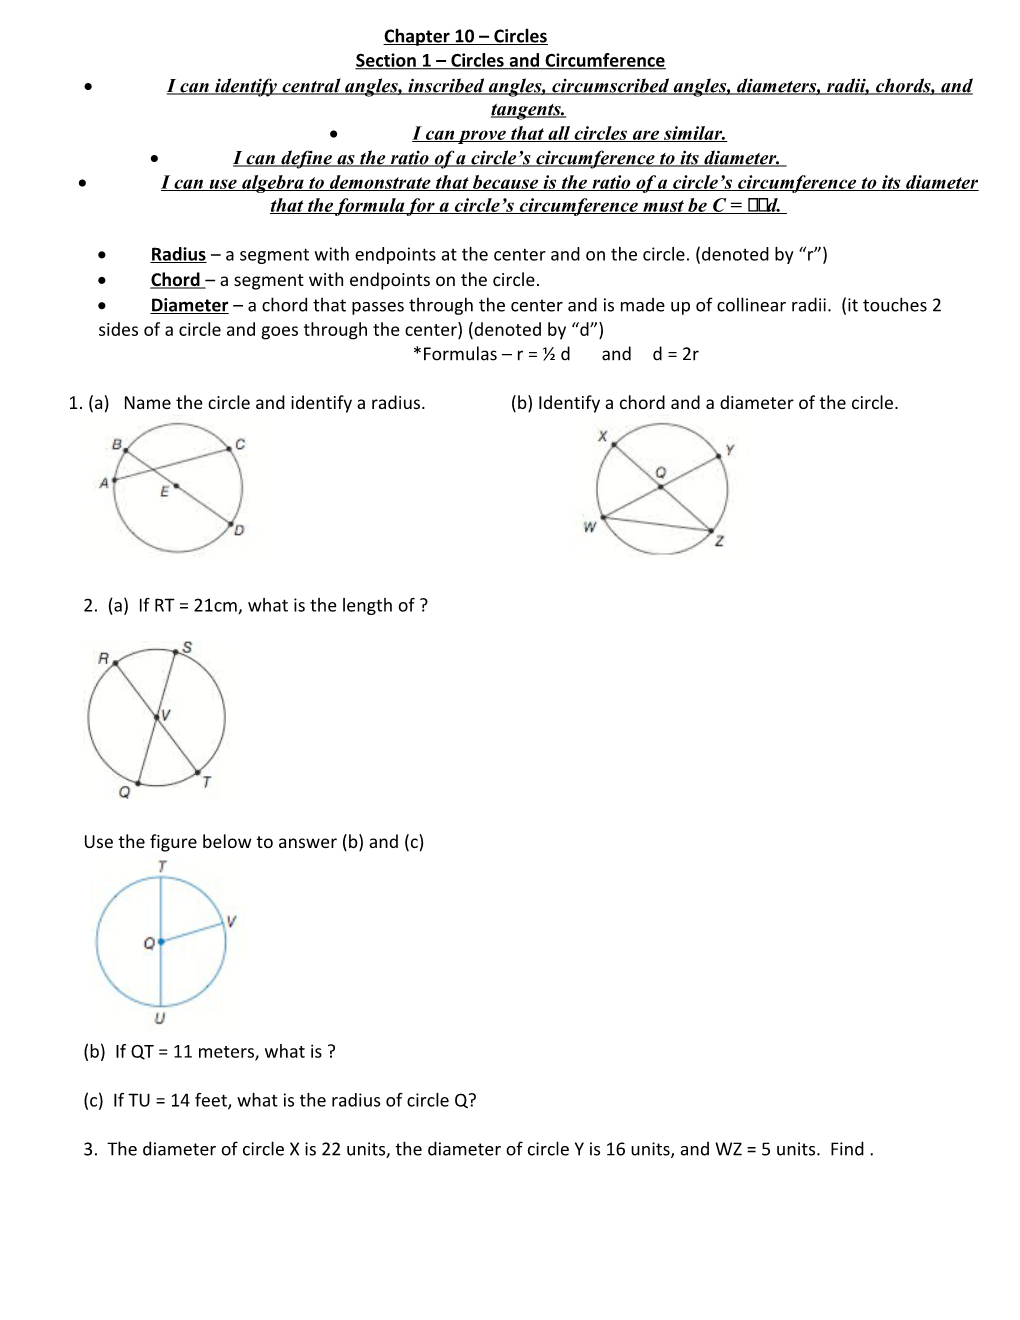 Section 1 Circles and Circumference